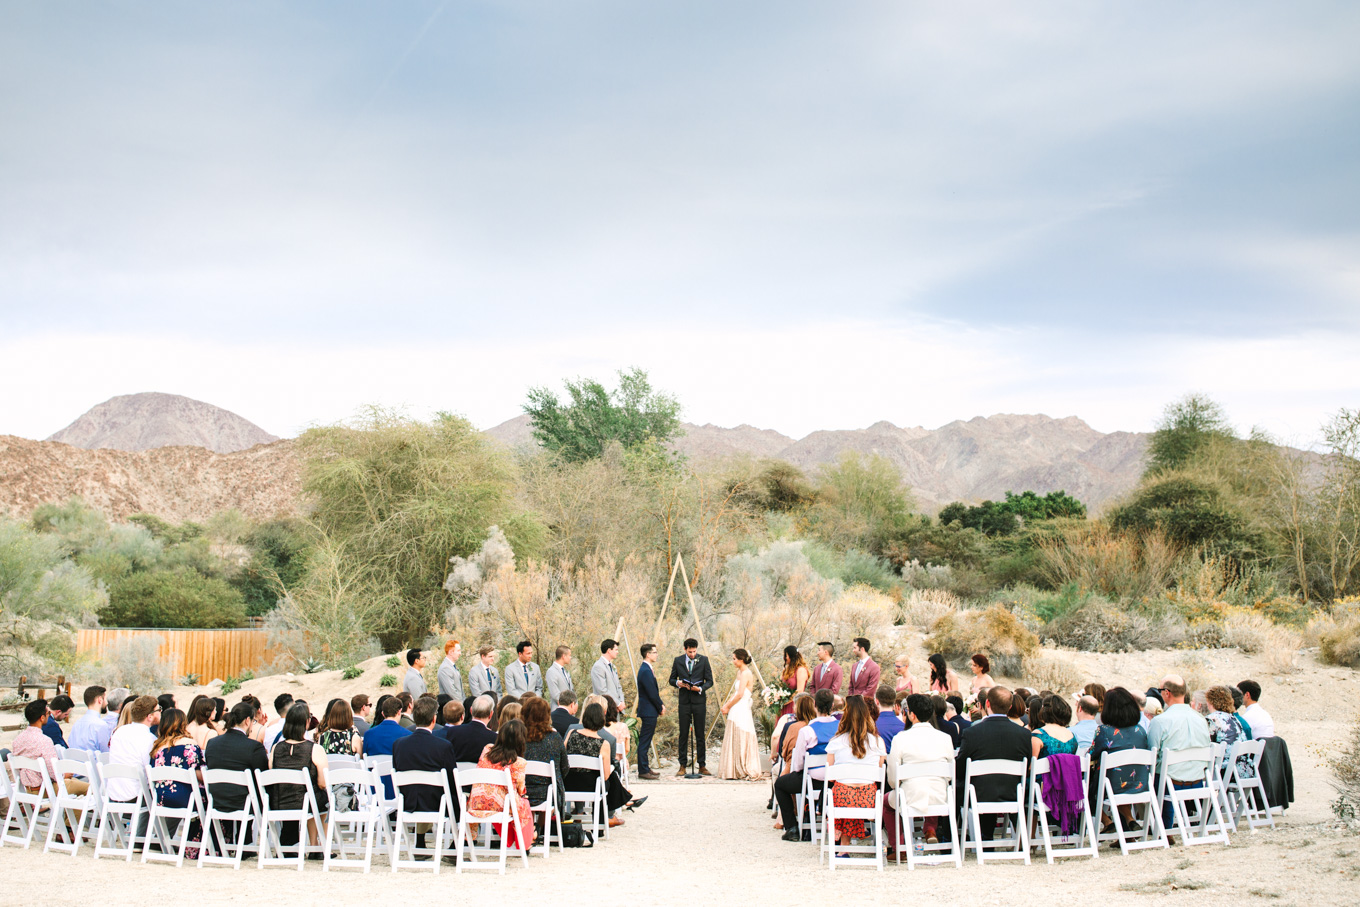 Wedding ceremony at Living Desert Zoo | Best Southern California Garden Wedding Venues | Colorful and elevated wedding photography for fun-loving couples | #gardenvenue #weddingvenue #socalweddingvenue #bouquetideas #uniquebouquet   Source: Mary Costa Photography | Los Angeles 